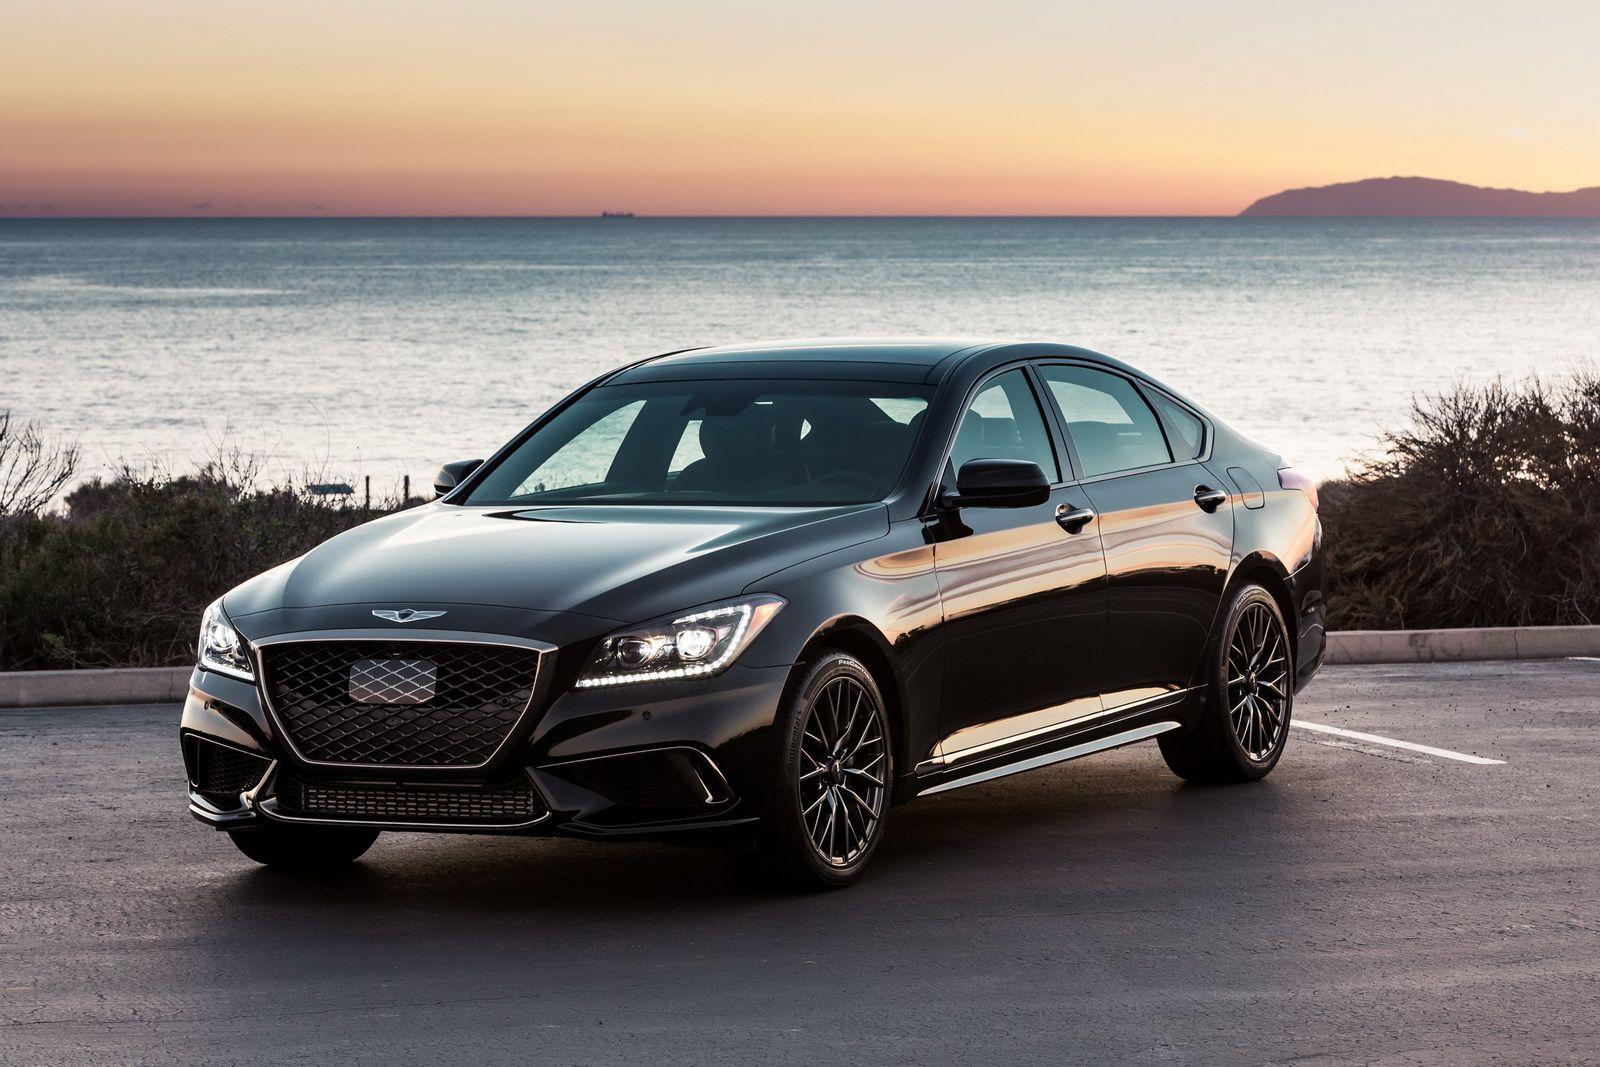 The 2018 Genesis G80 Sport is going to be displayed